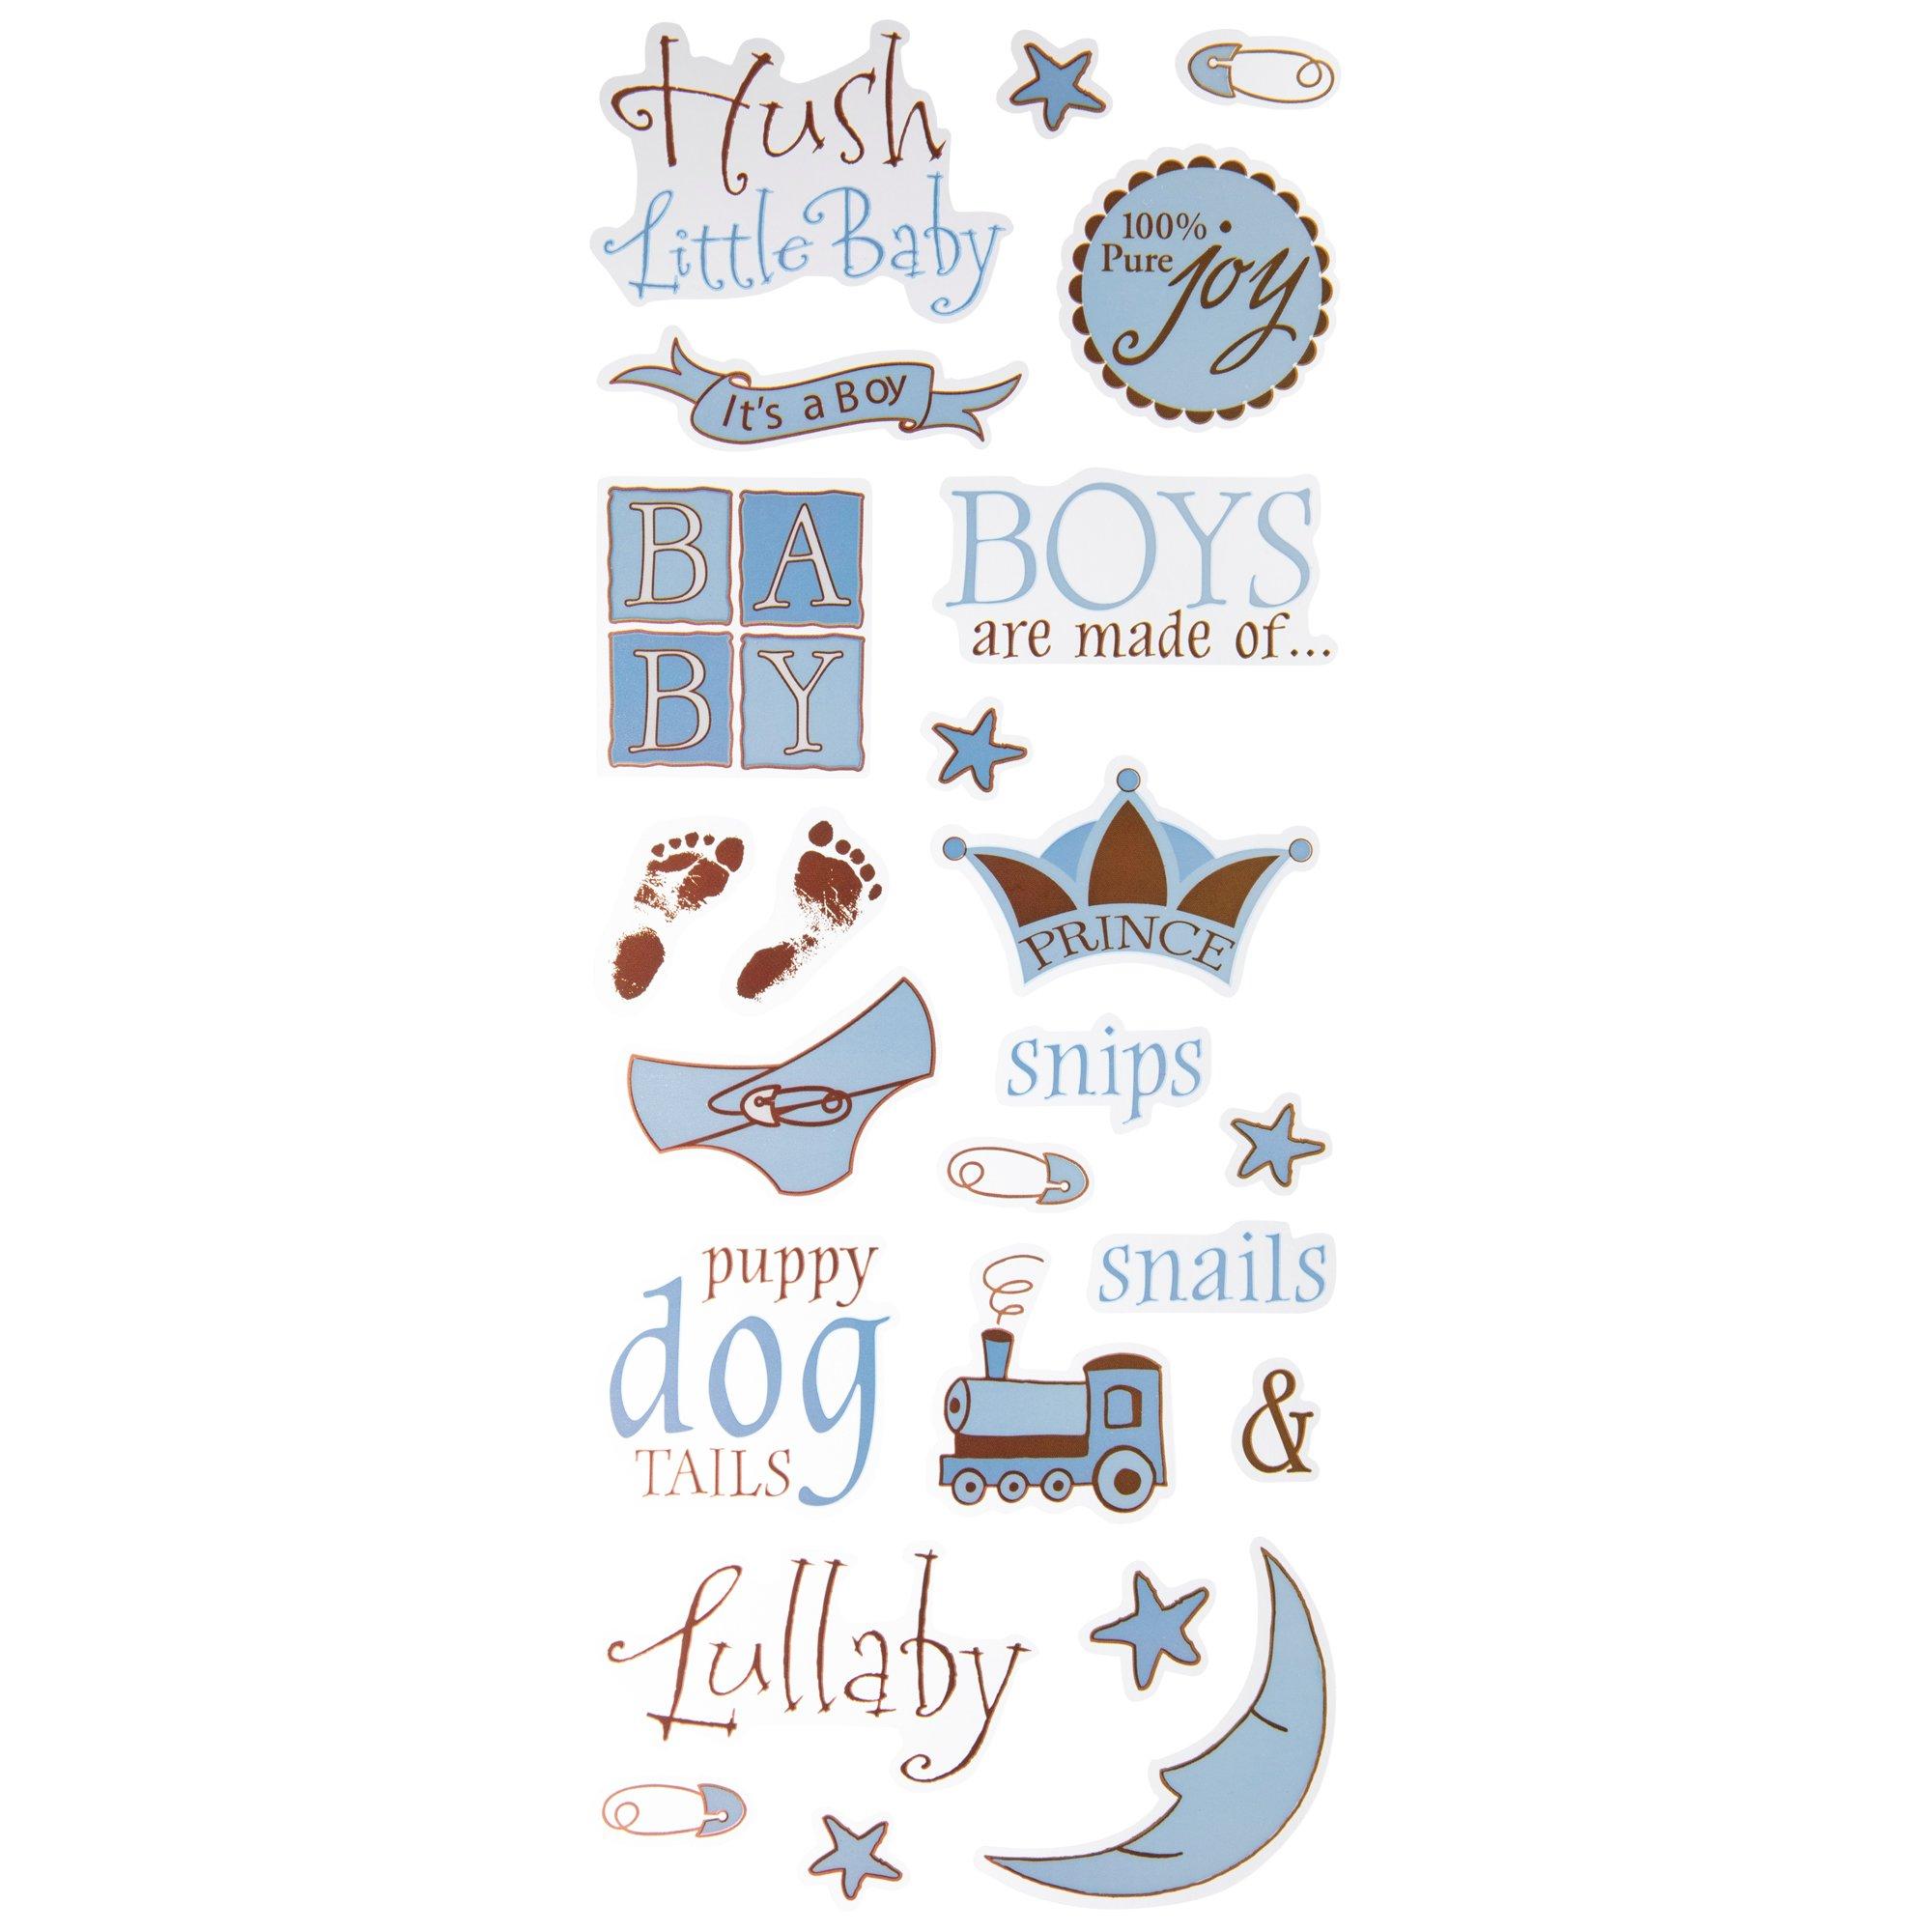 Baby Scrapbook Stickers - Baby Boy Scrapbook Stickers with Cute Phrases,  Animals, Toys Design | Baby Stickers for Scrapbooking, Photo Album, Diary